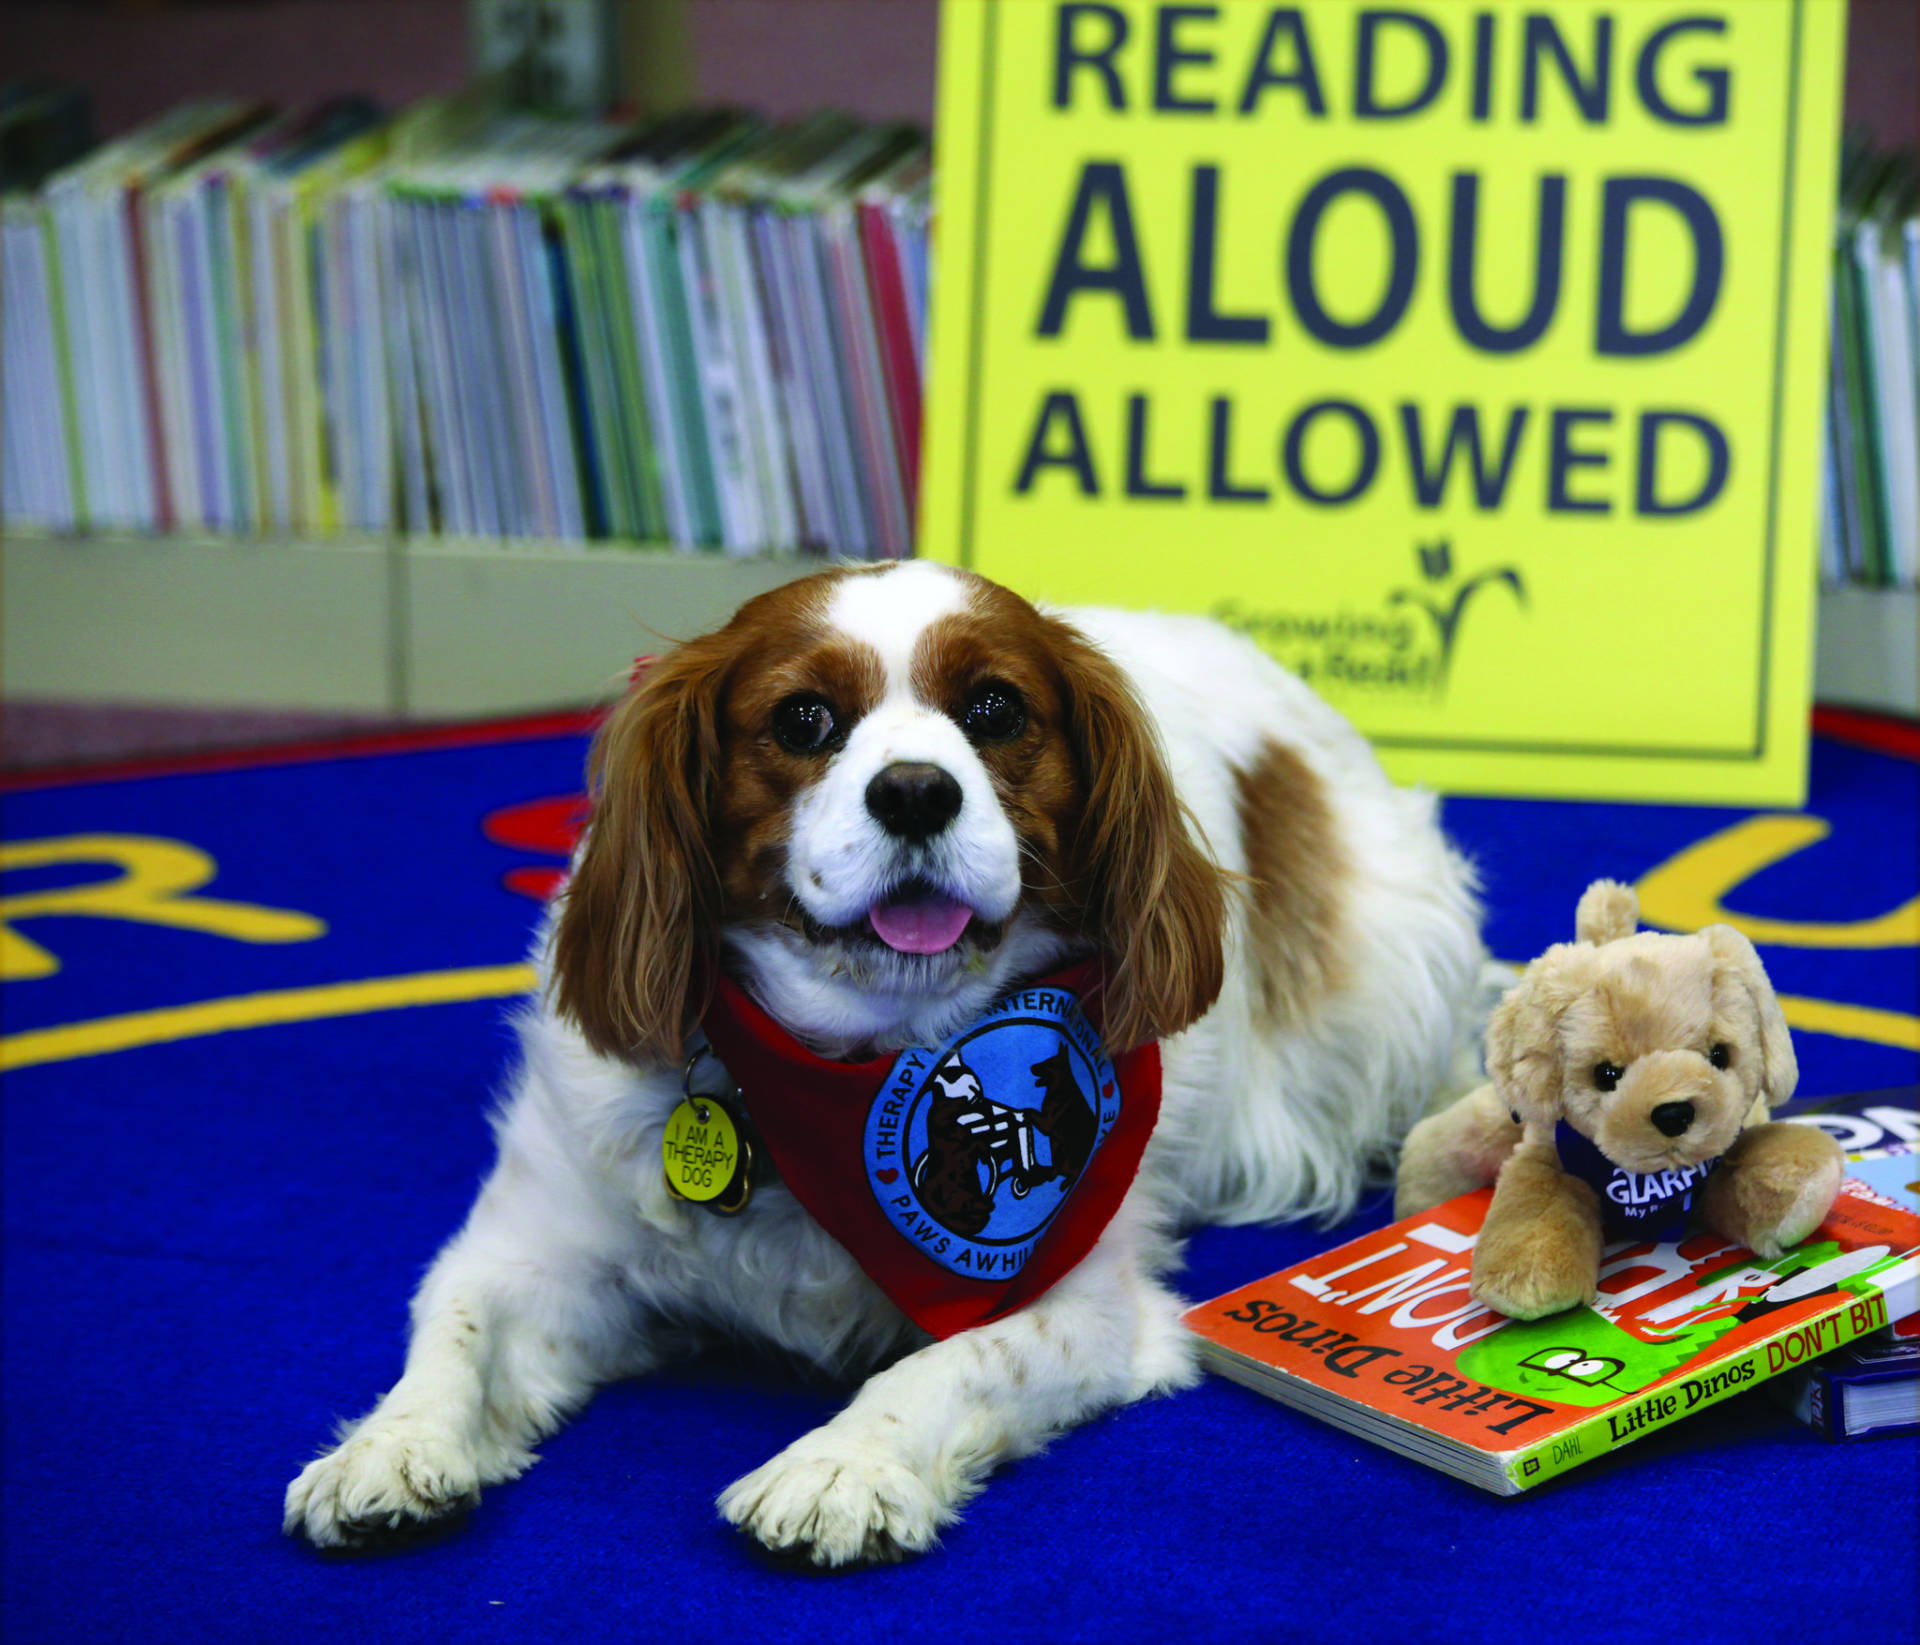 How Reading Aloud to Therapy Dogs Can Help Struggling Kids | KQED